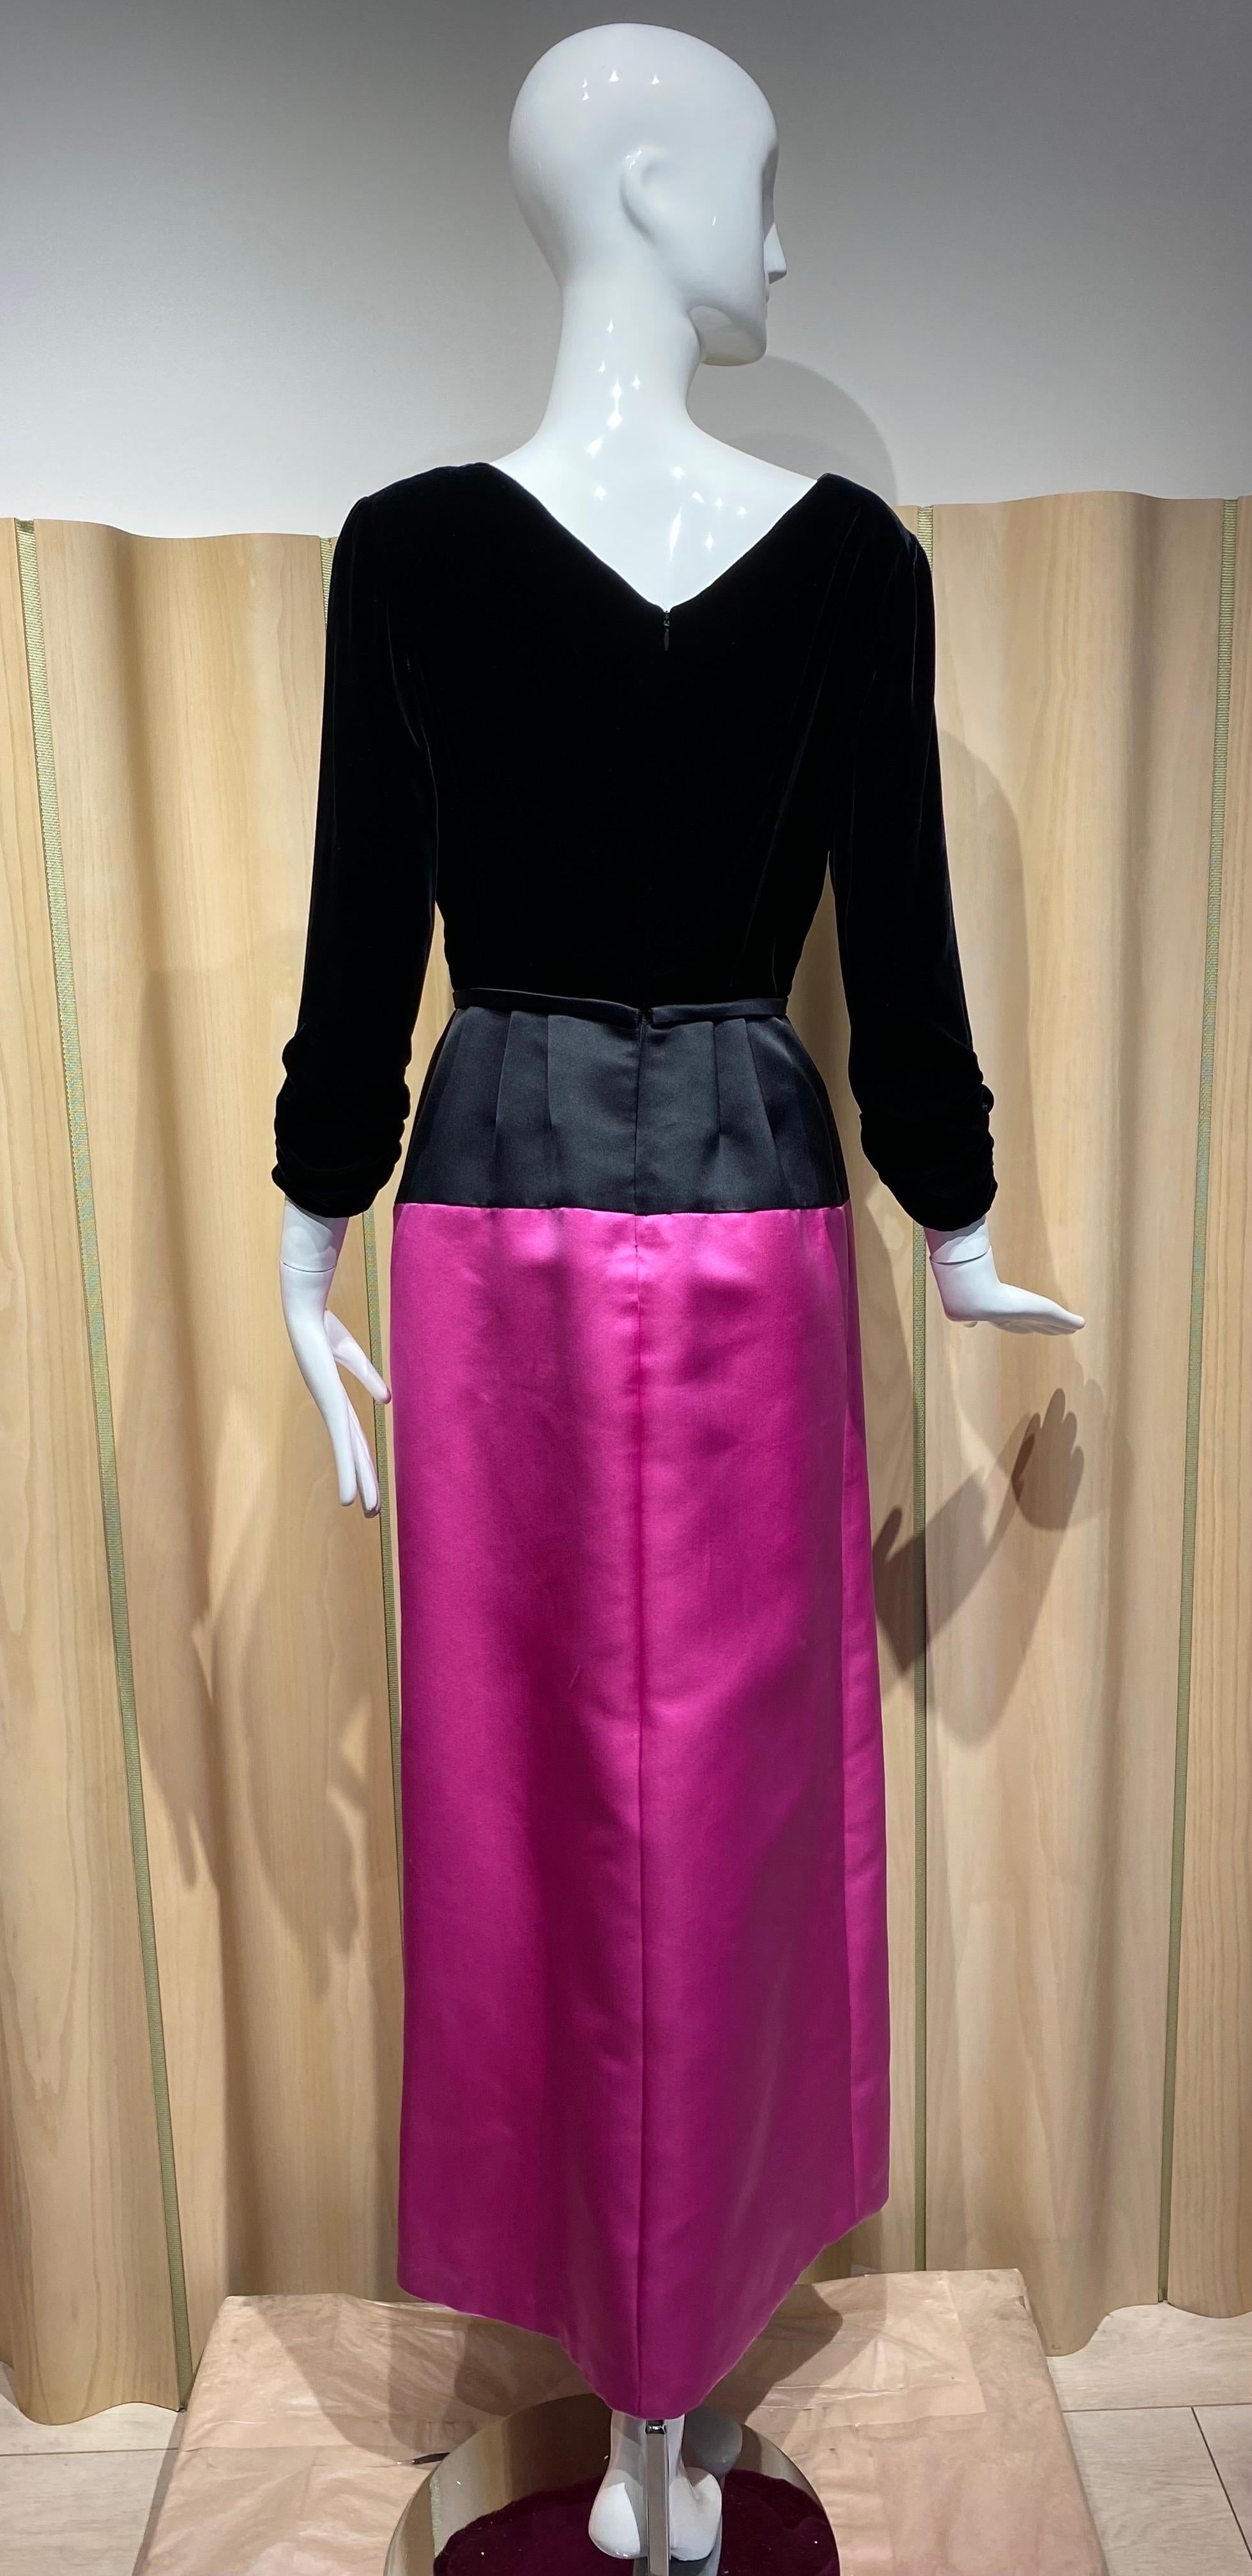 Women's 1980s Bill Blass Black and Pink Cocktail Dress For Sale